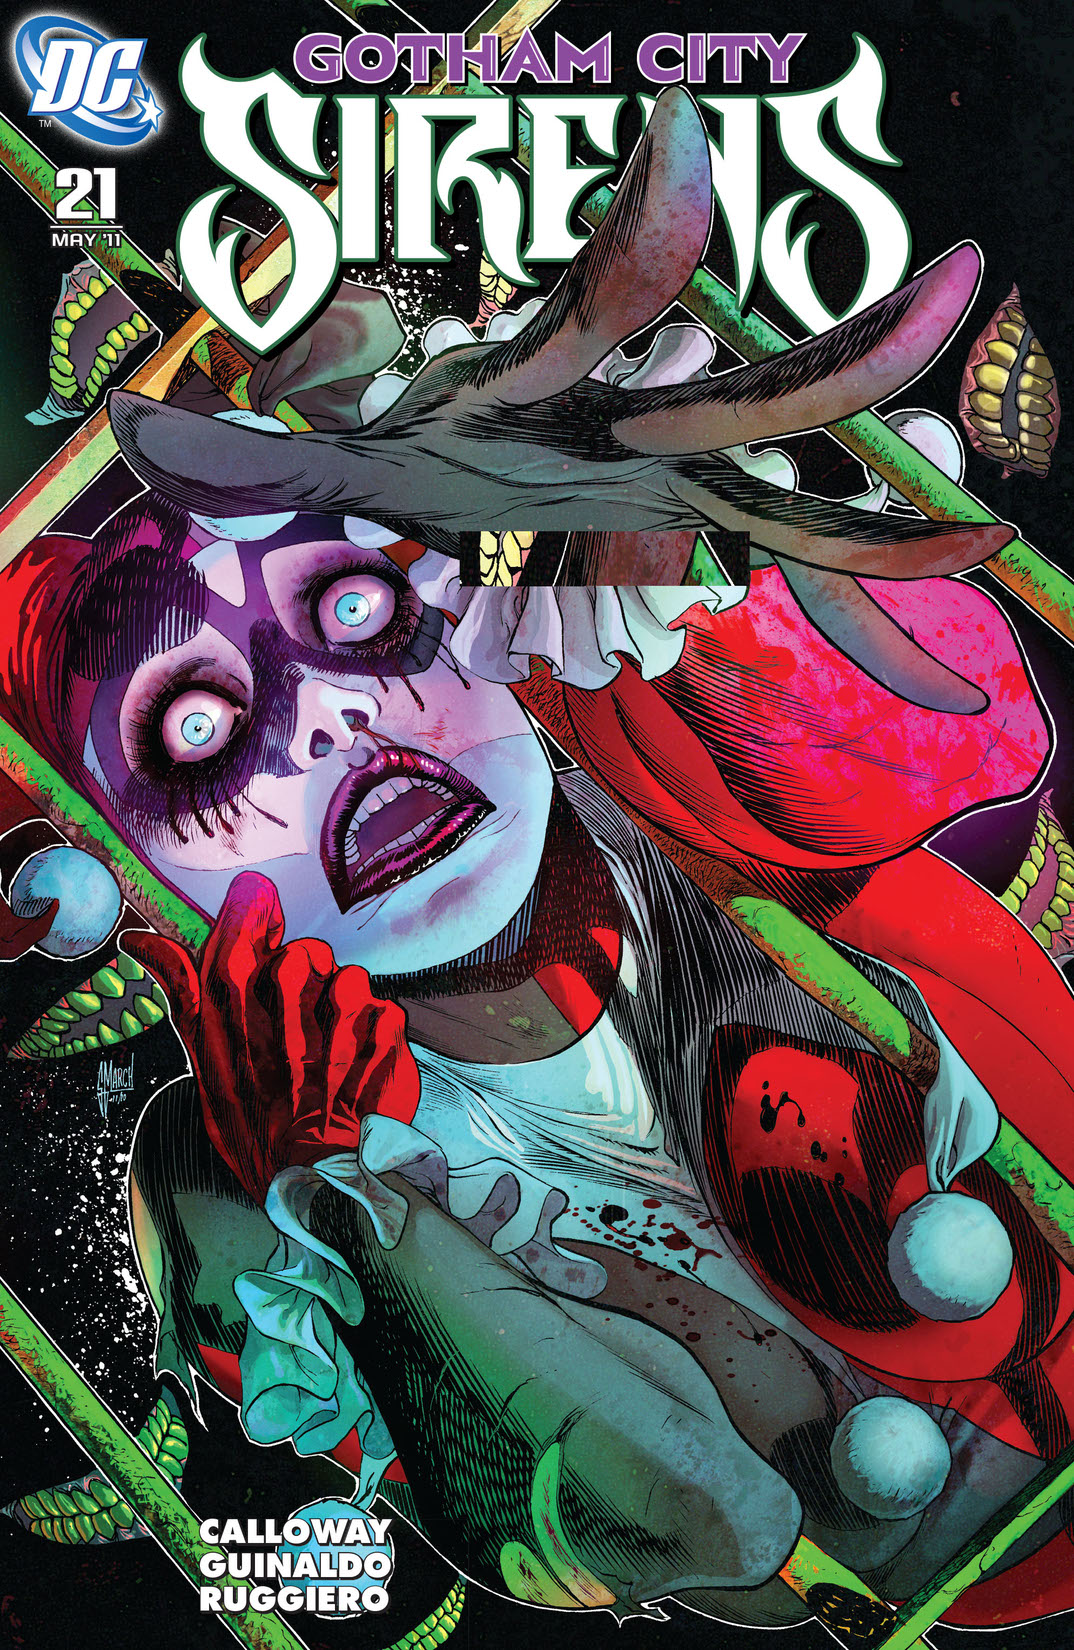 Gotham City Sirens #21 preview images